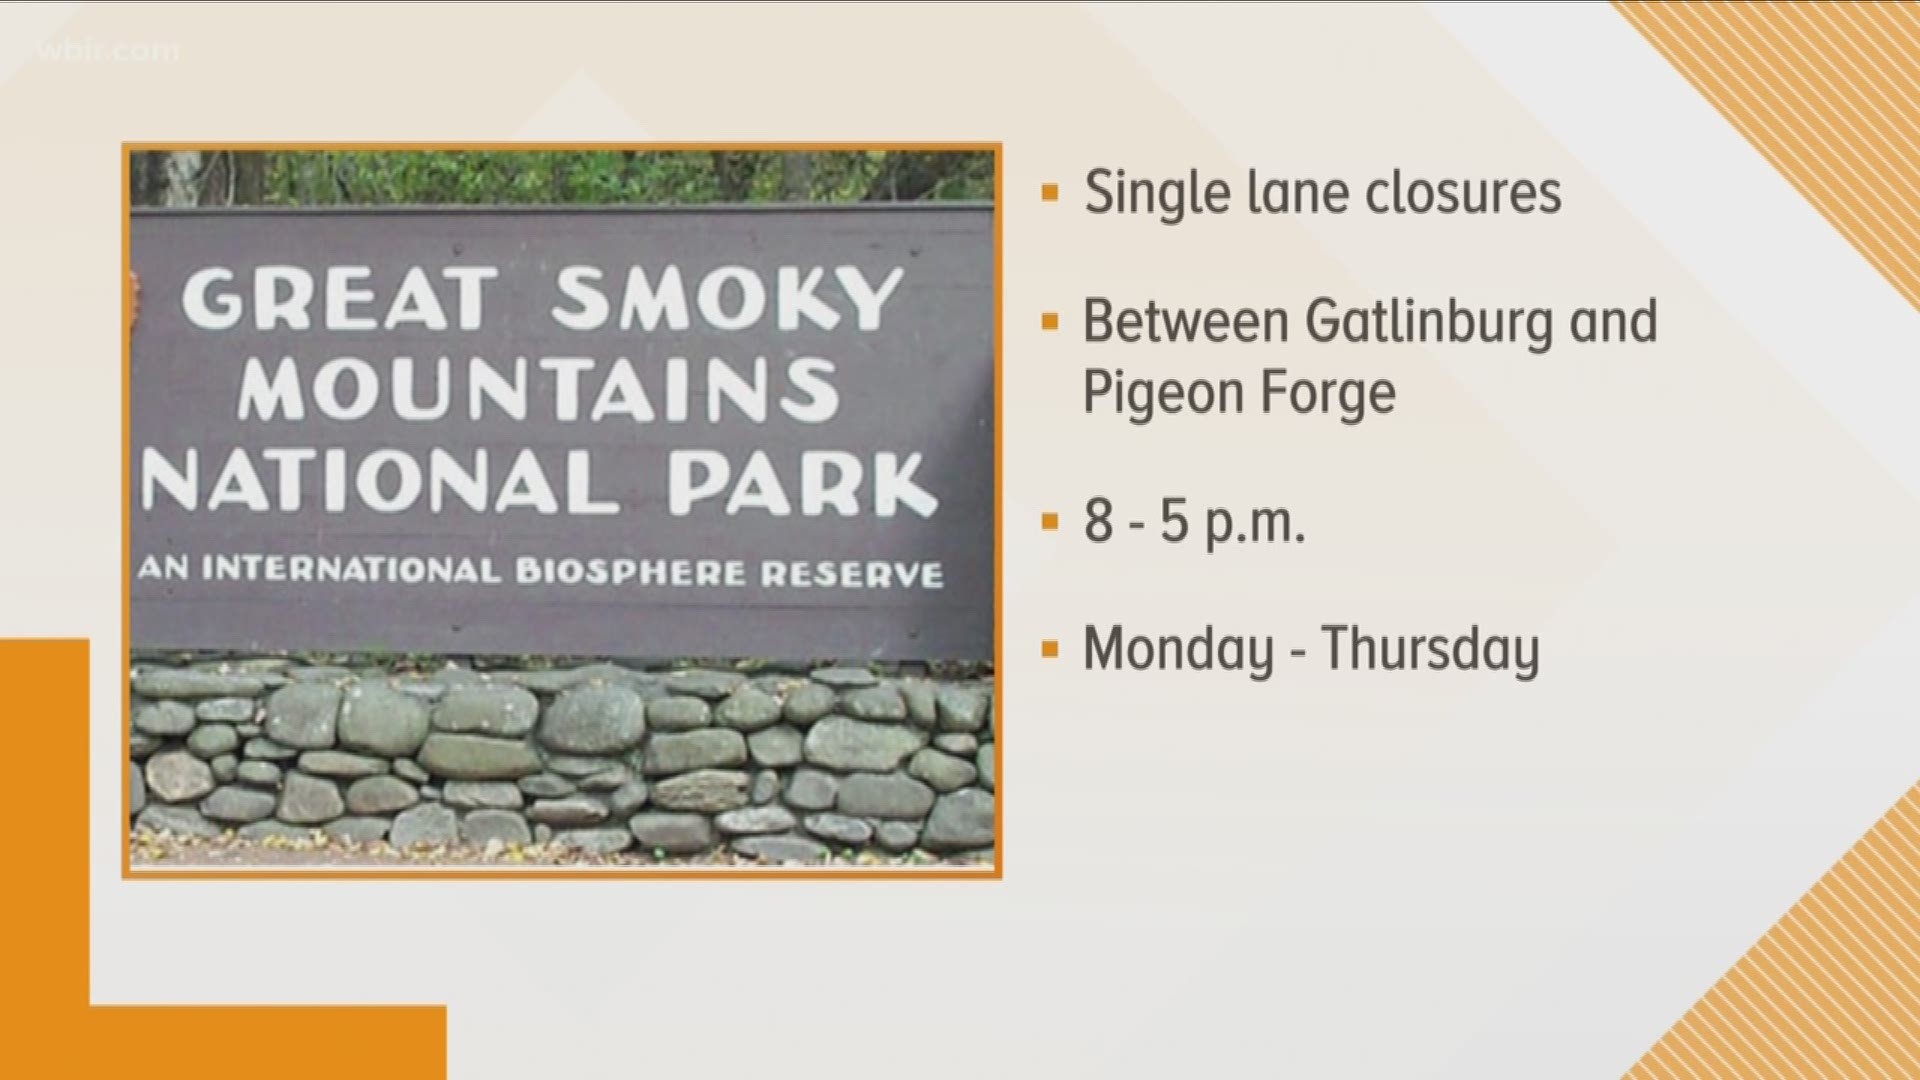 Officials in the Great Smoky Mountains National Park say you can expect single-lane closures between Pigeon Forge and Gatlinburg.